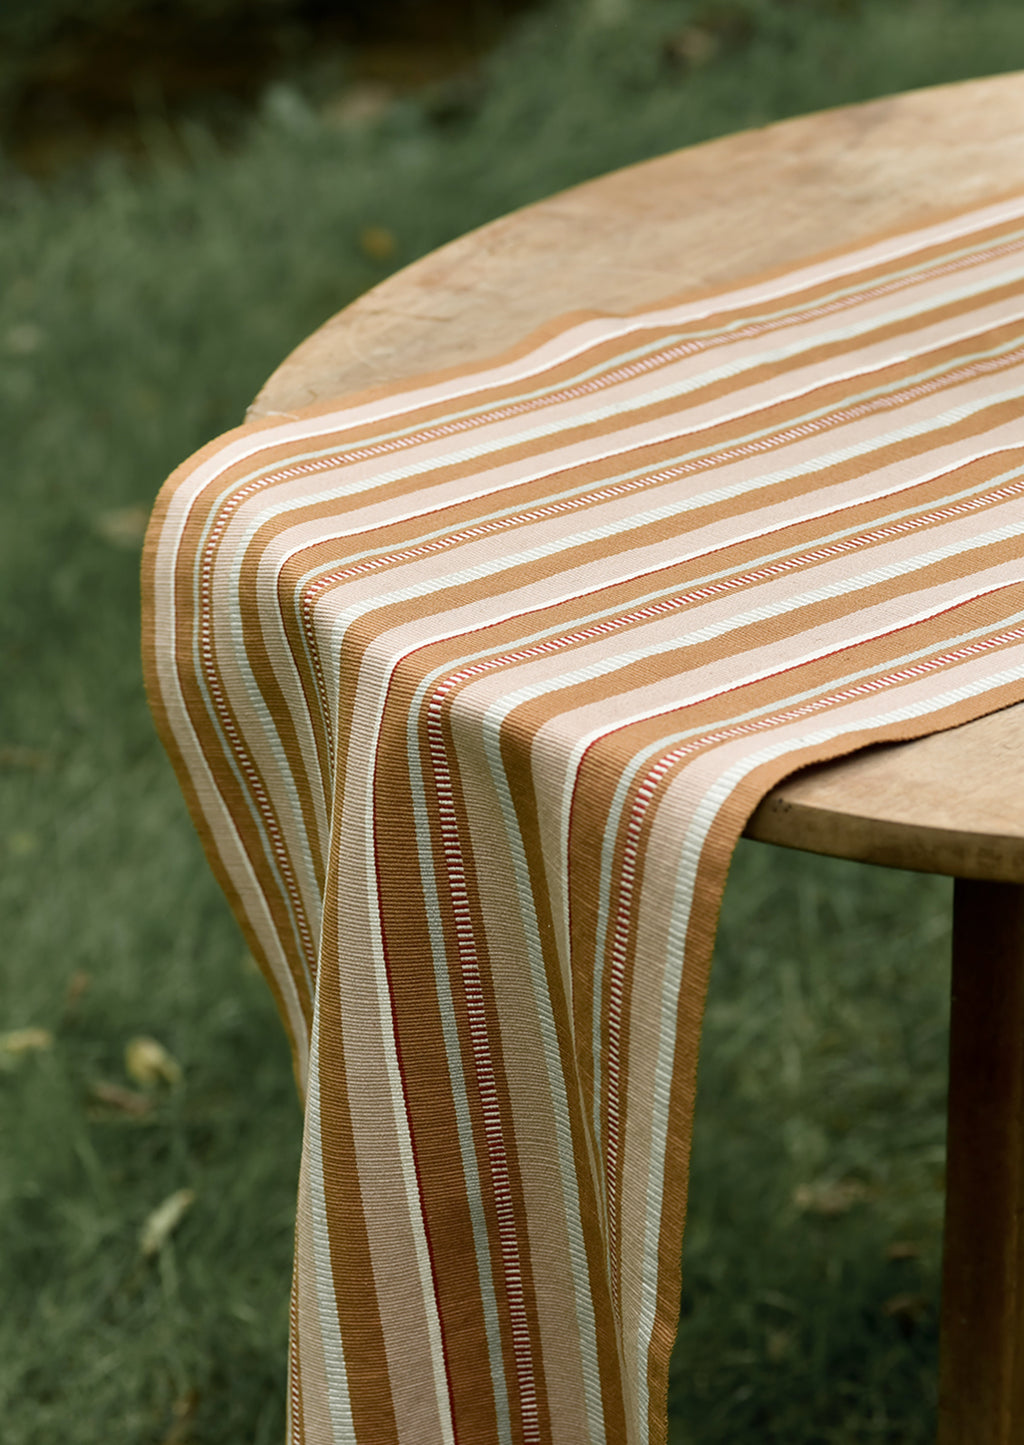 2: A tan striped table runner on a table.